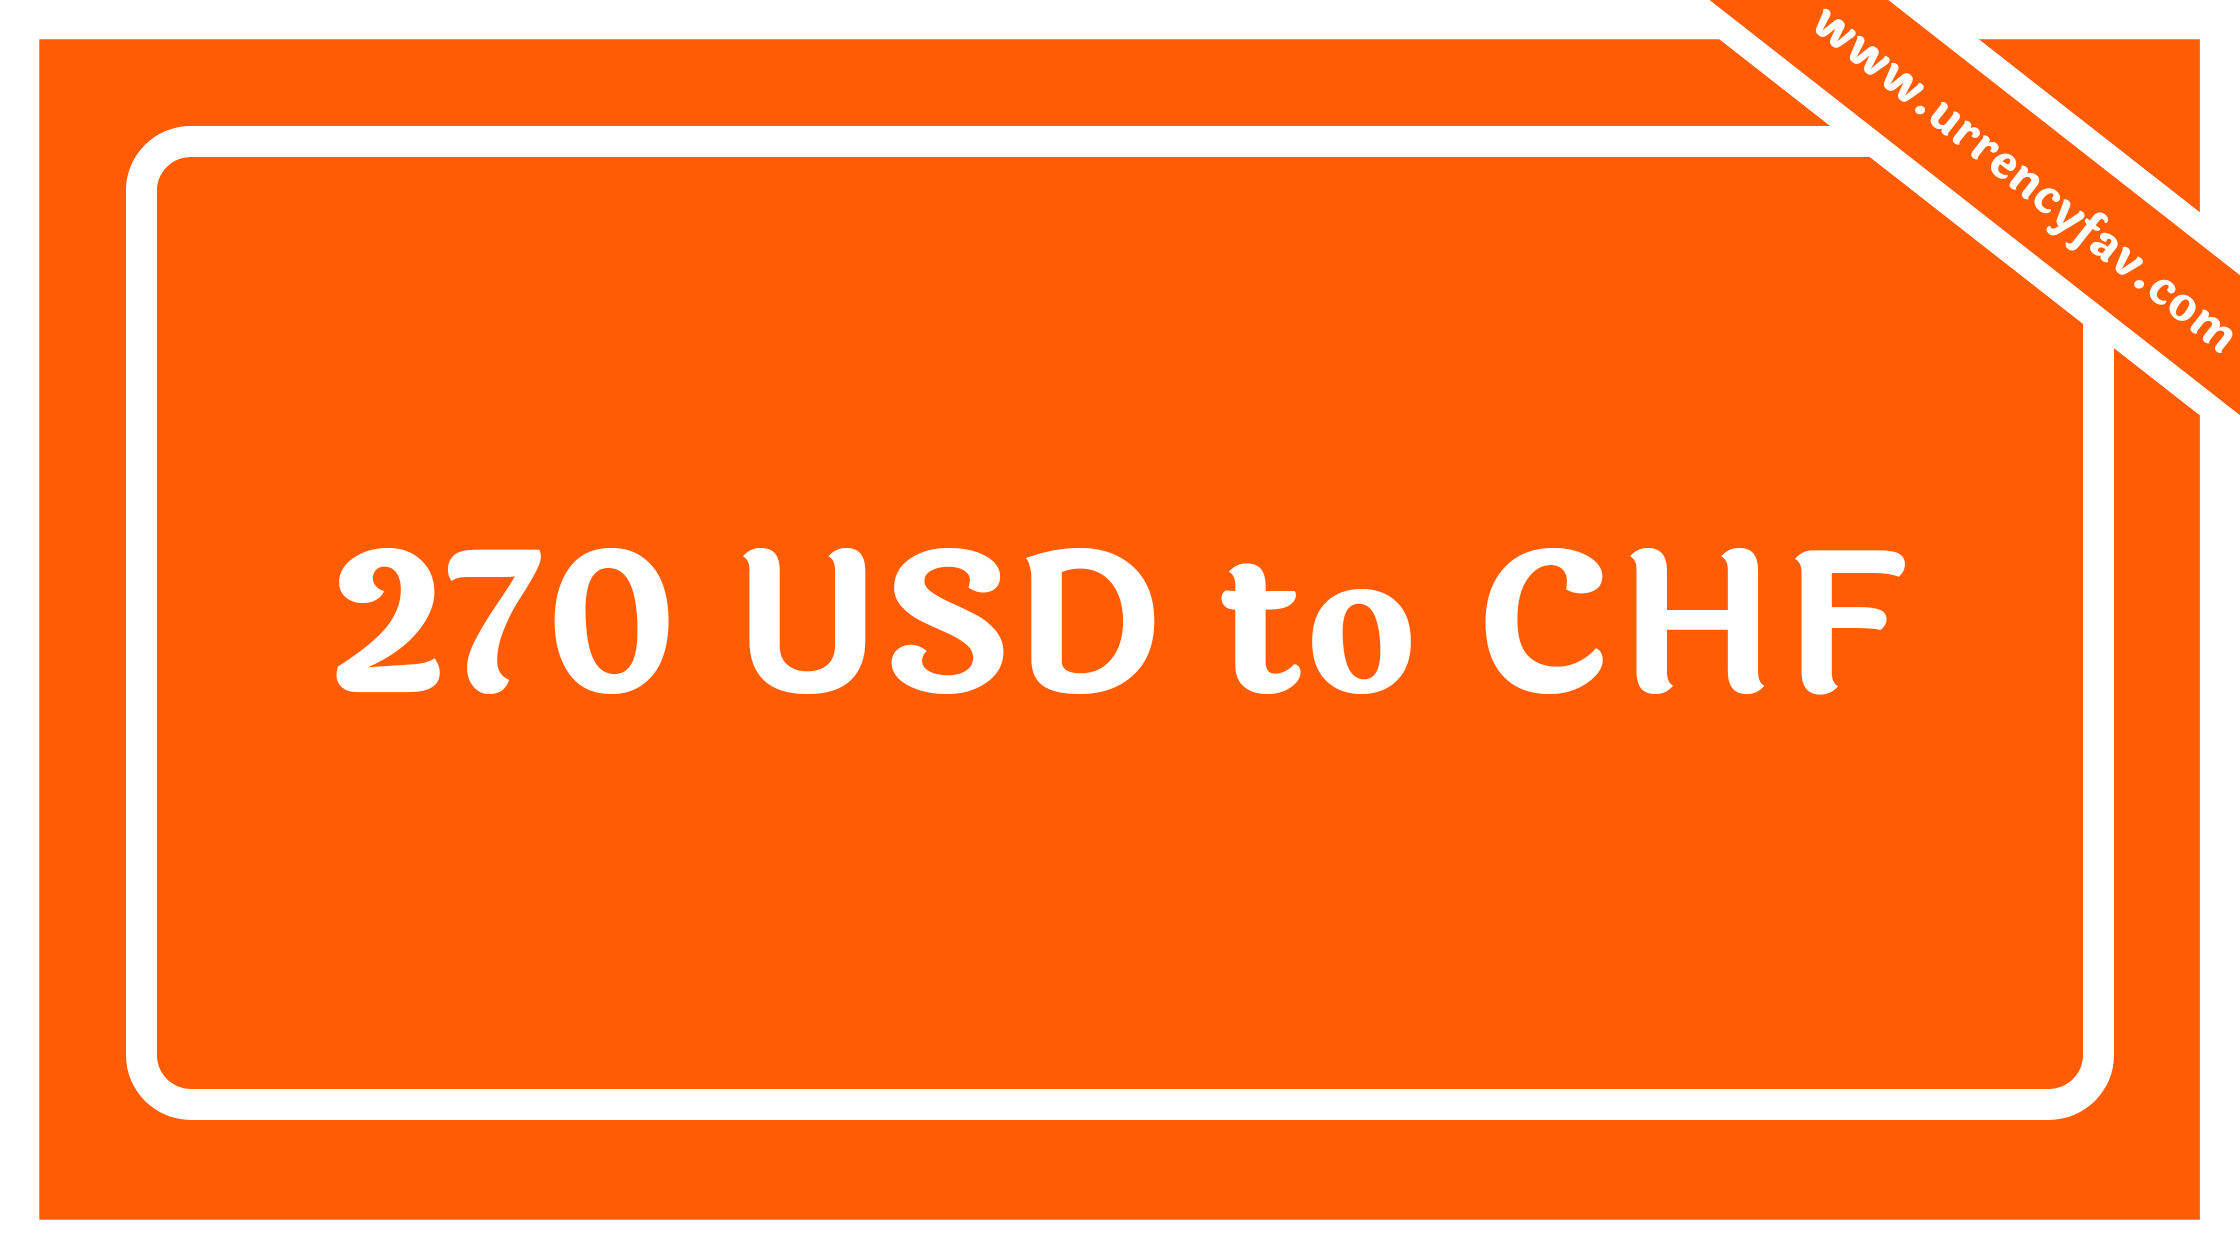 270 USD to CHF